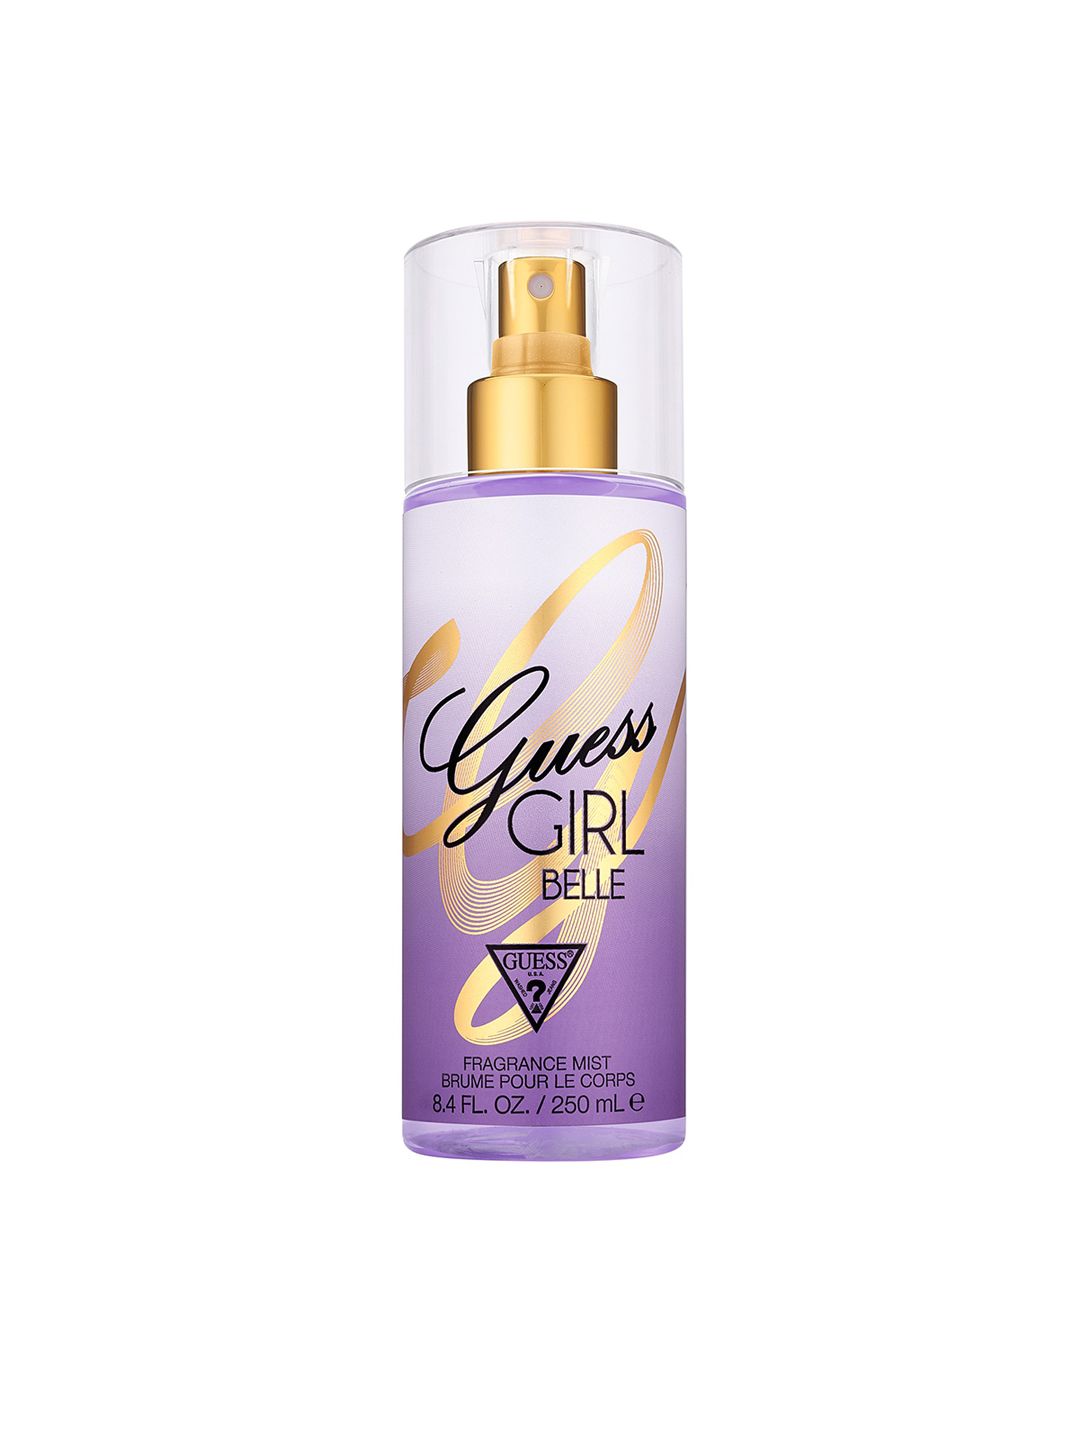 GUESS Girl Belle Body Mist - 250 ml Price in India